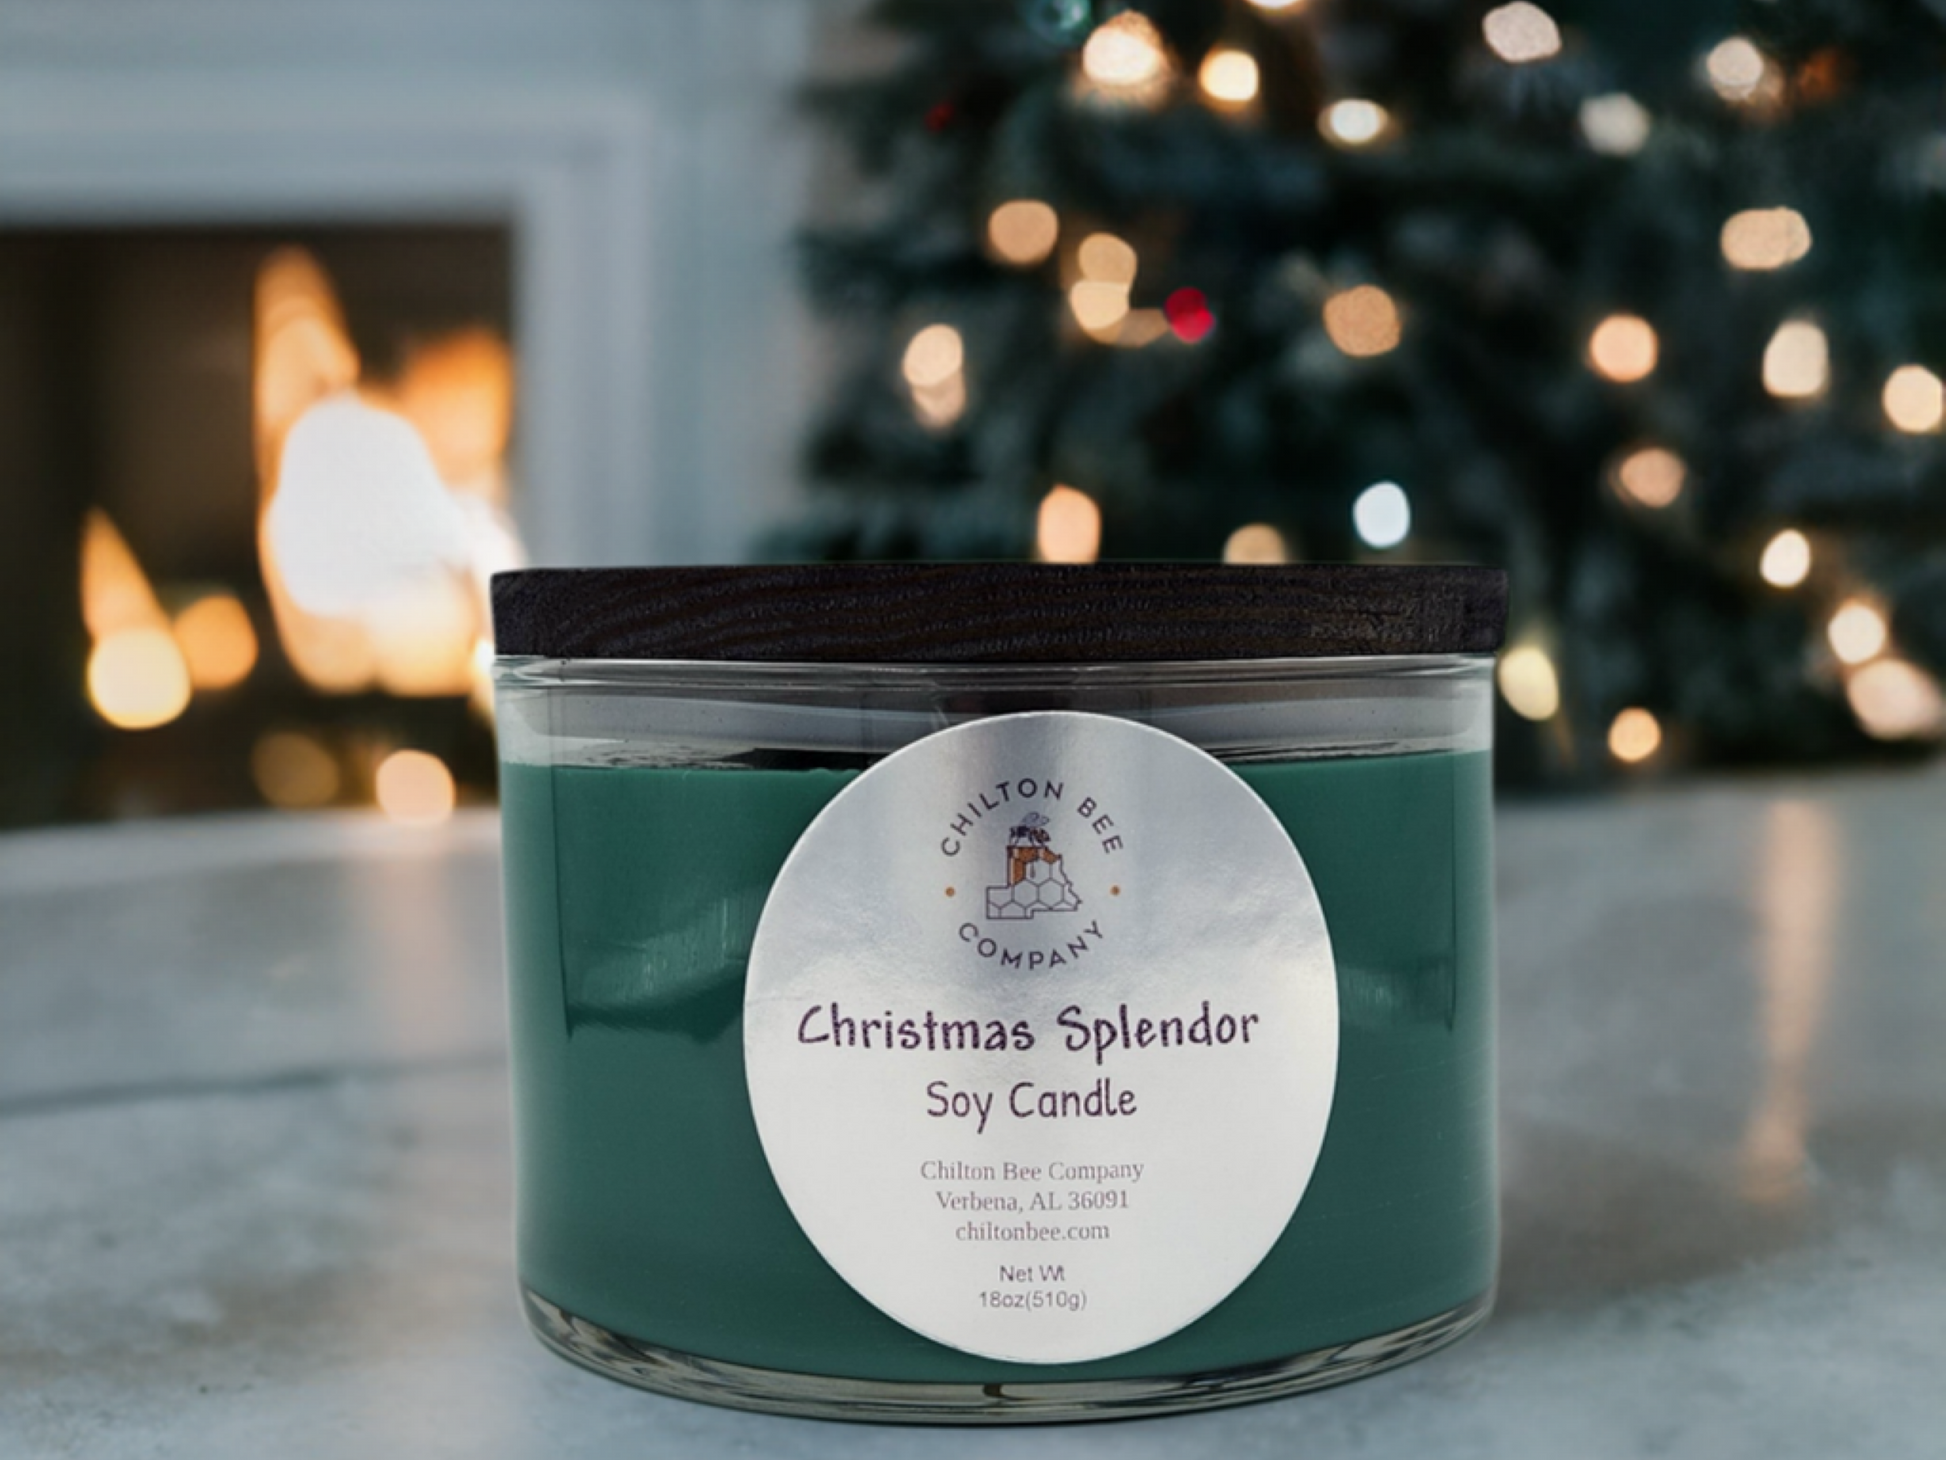 3 Wick Soy Candle Natural Soy Wax - Chilton bee company 